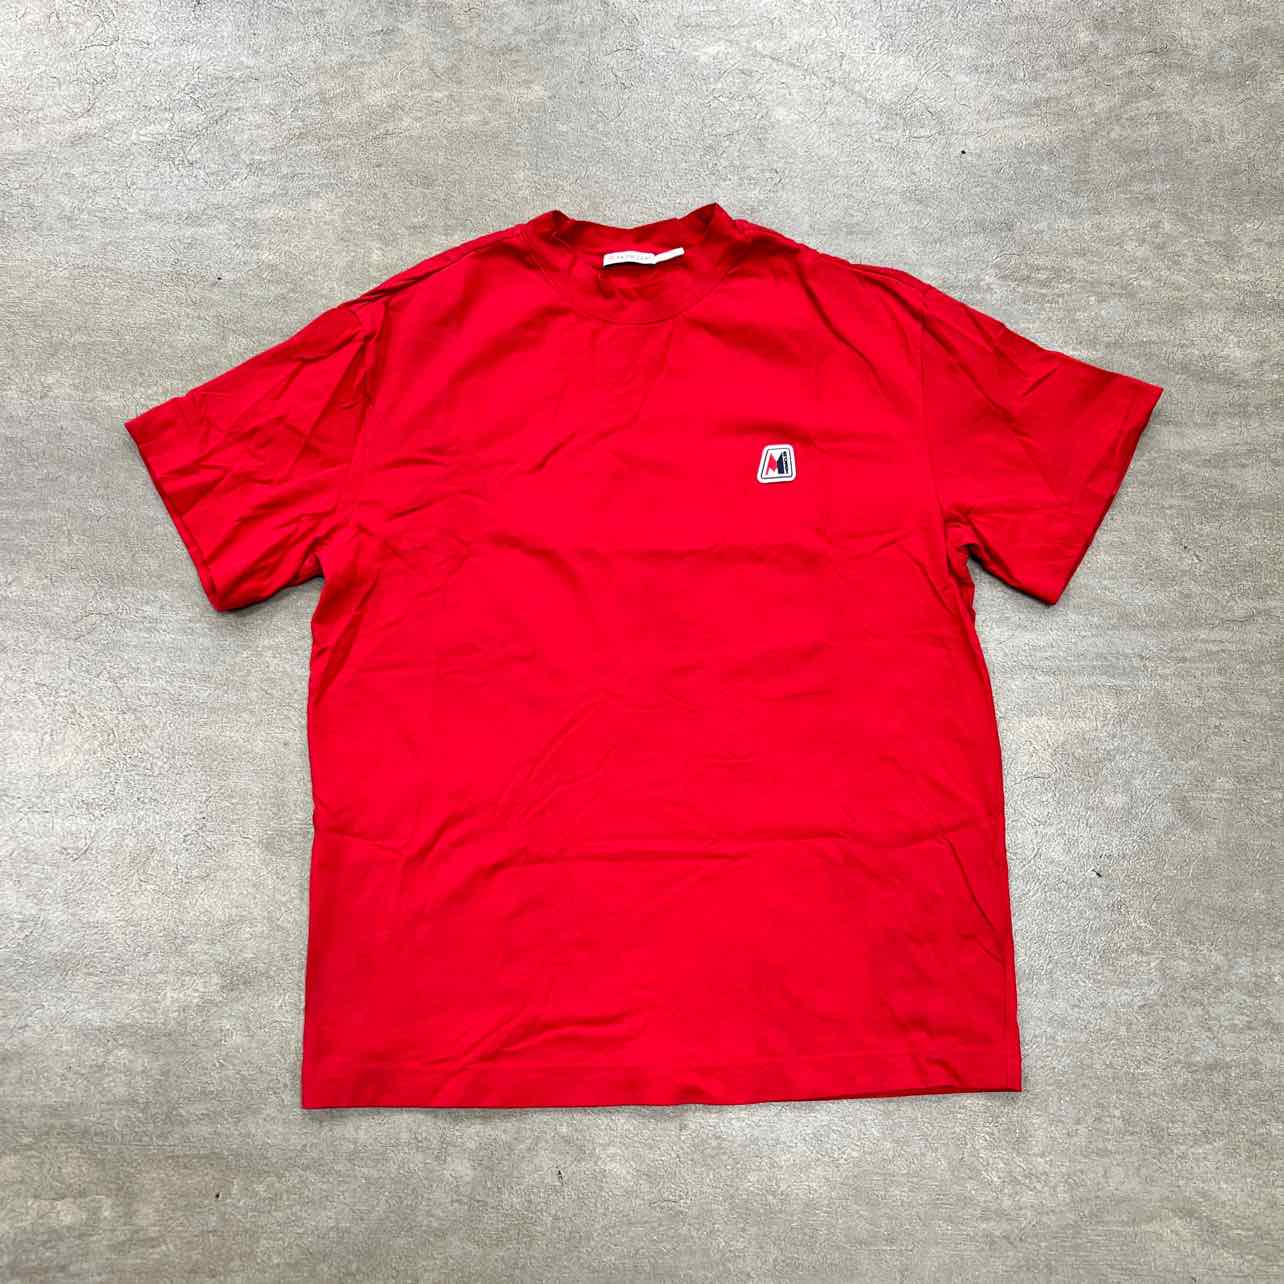 Moncler T-Shirt &quot;MAGLIA&quot; Red Used Size L